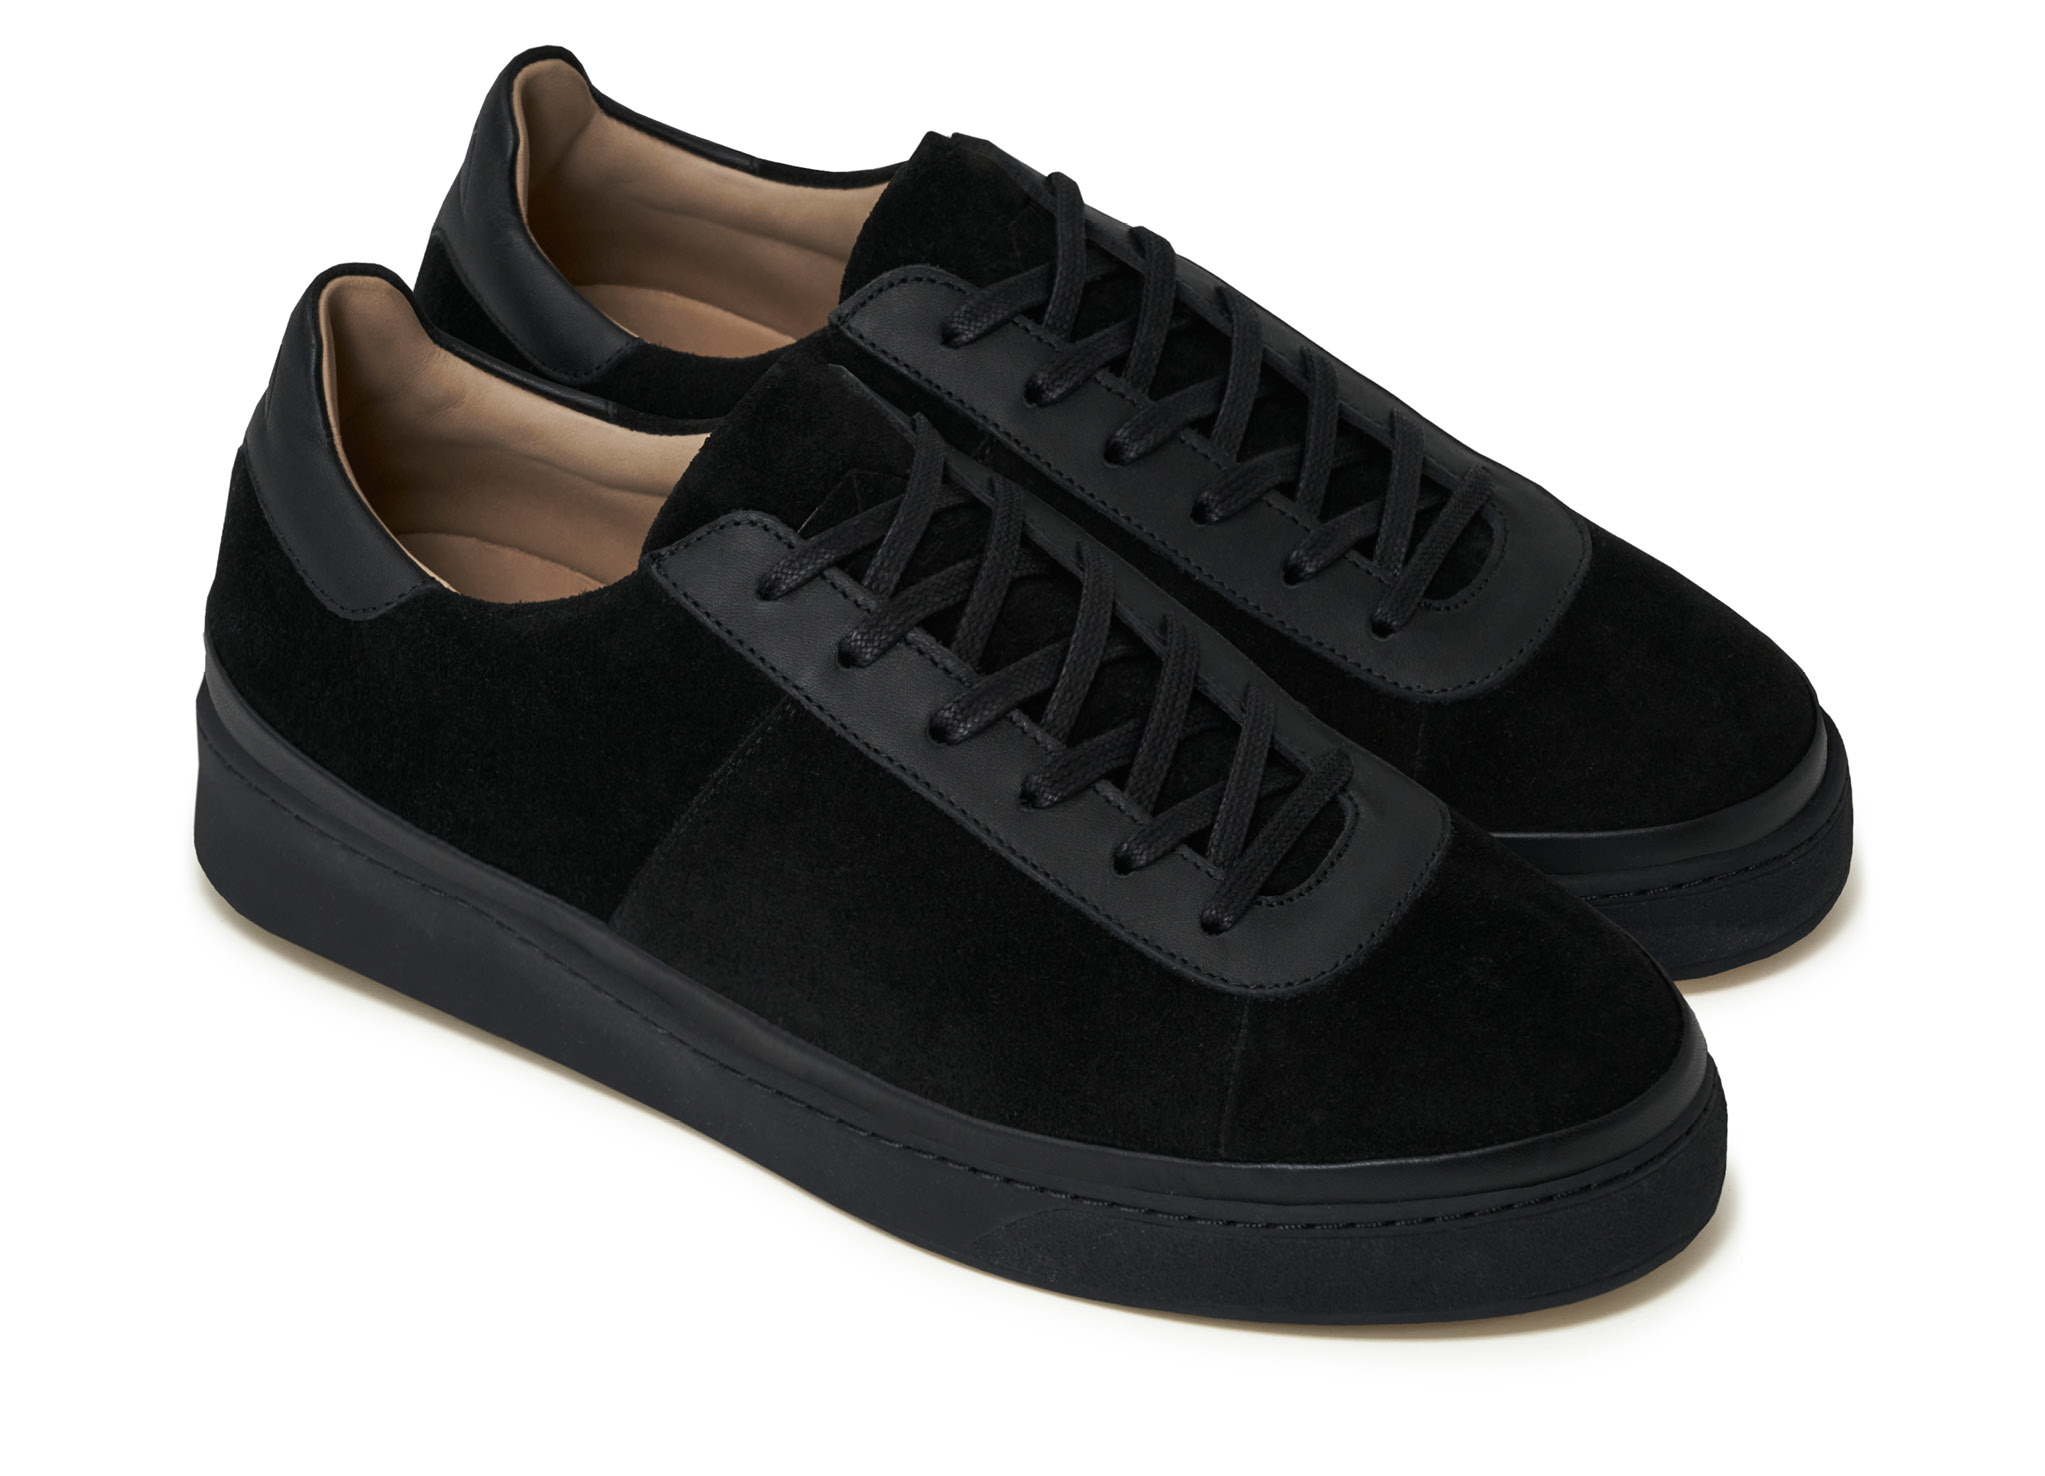 Black Sneakers for Men MULO Shoes Highquality Italian Suede